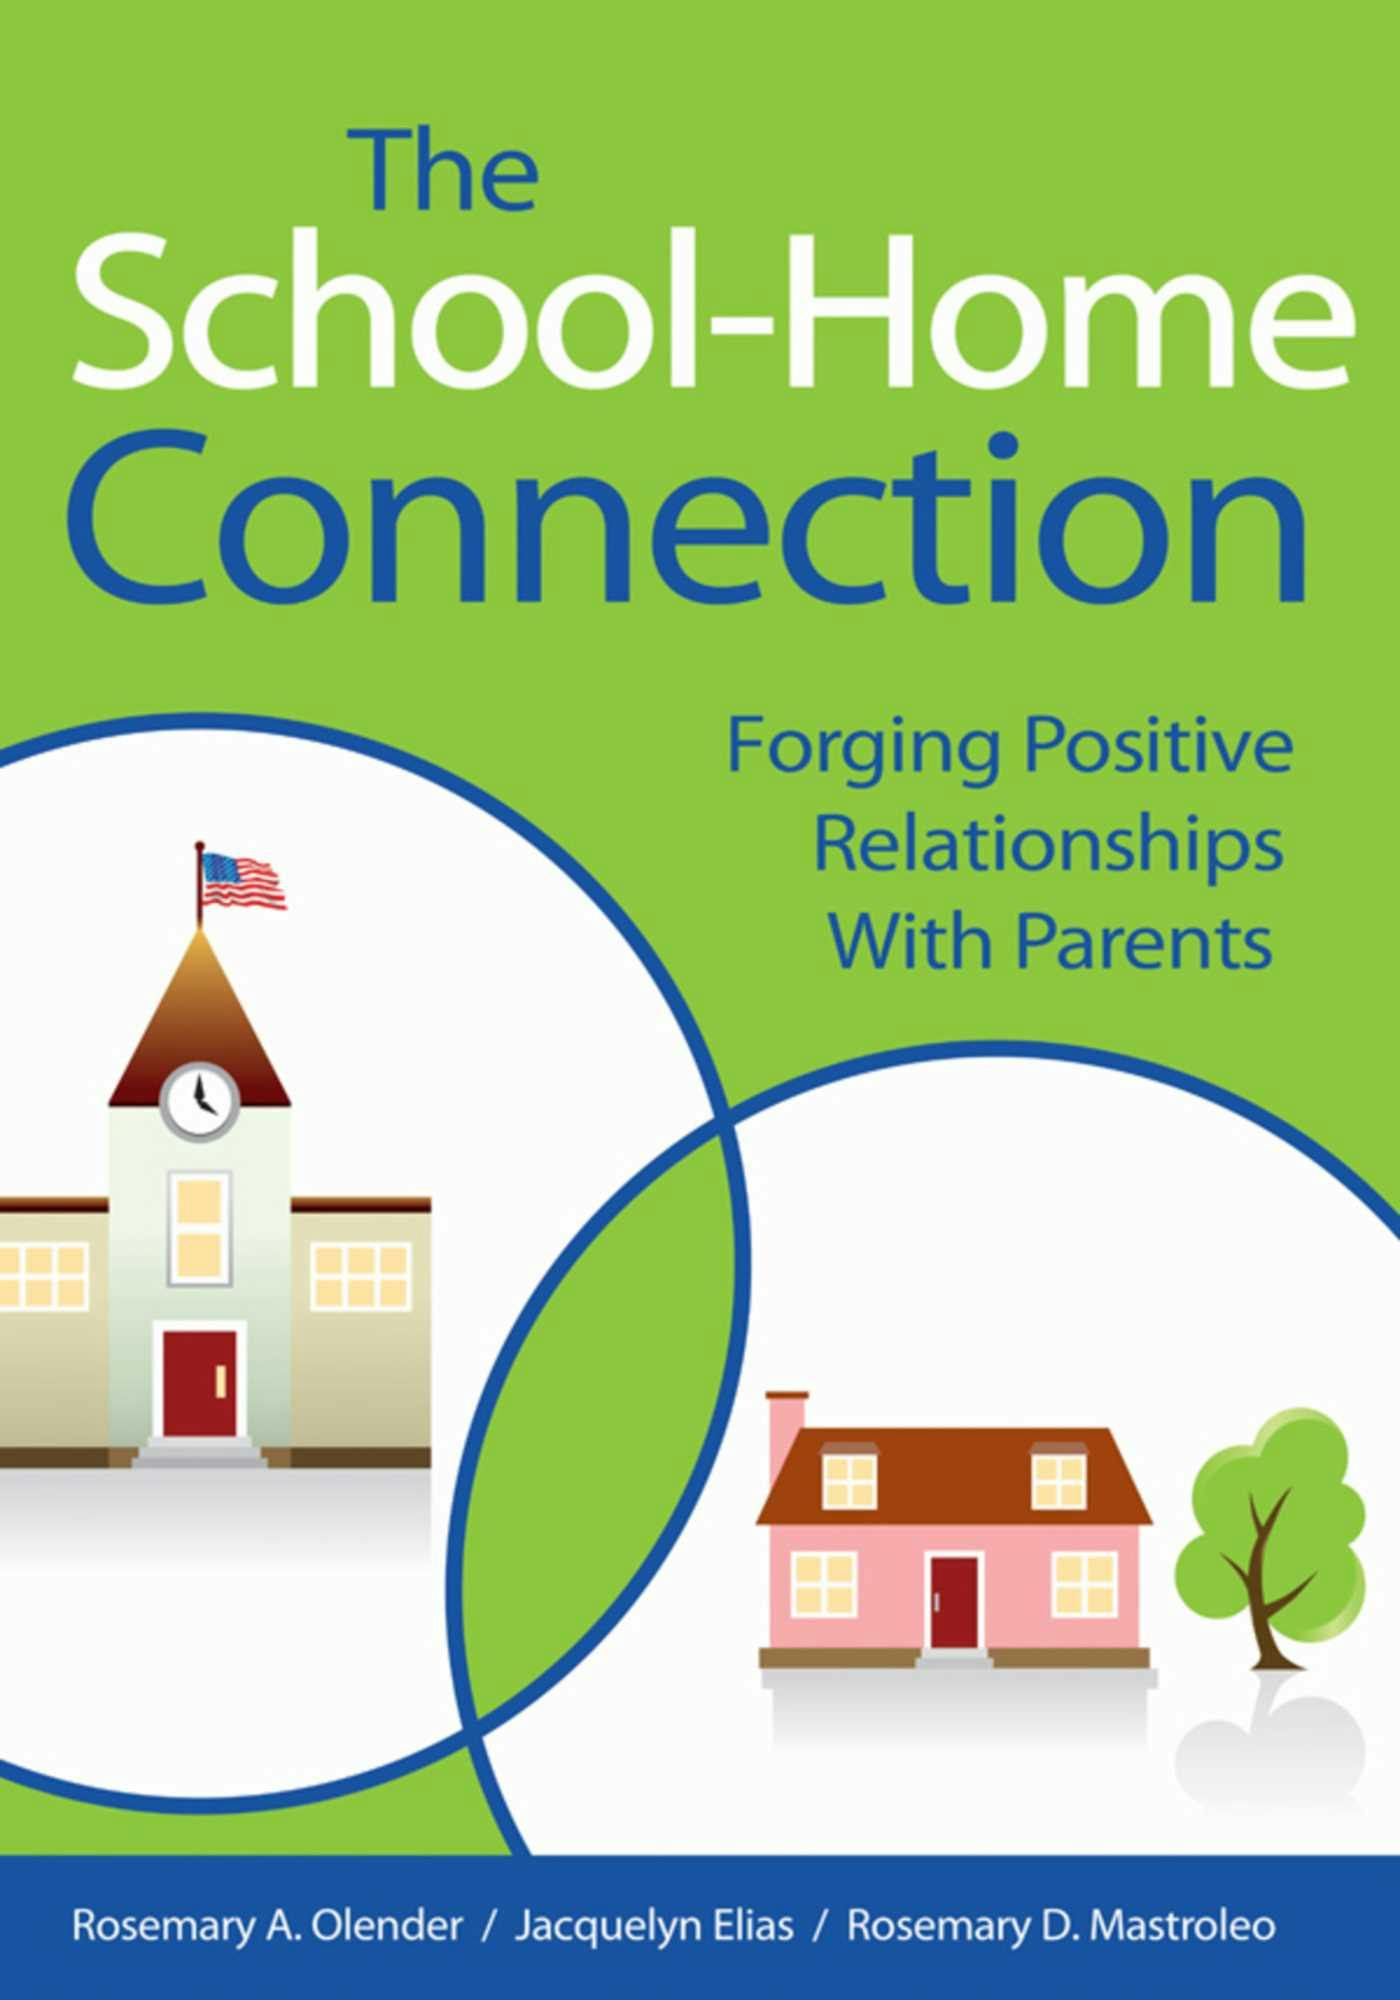 The School-Home Connection: Forging Positive Relationships with Parents - Rosemary A. Olender, Rosemary D. Mastroleo, Jacquelyn Elias